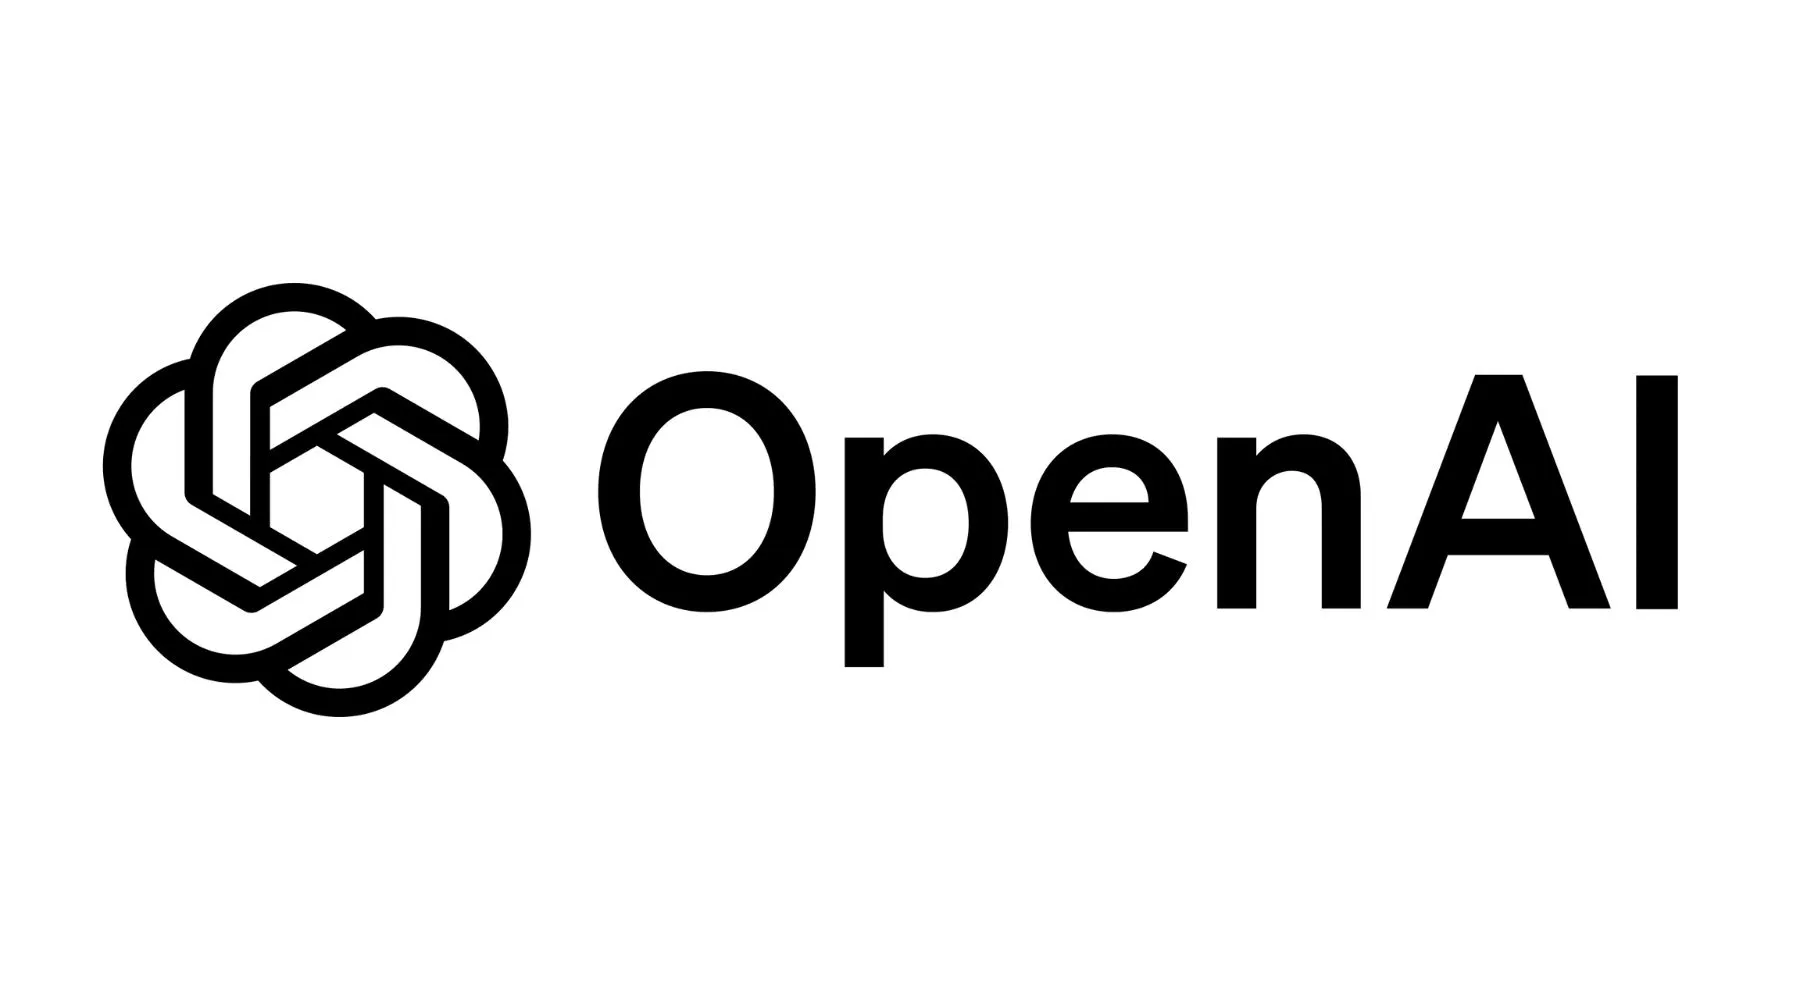 How to buy OpenAI stock or ChatGPT stock in Canada